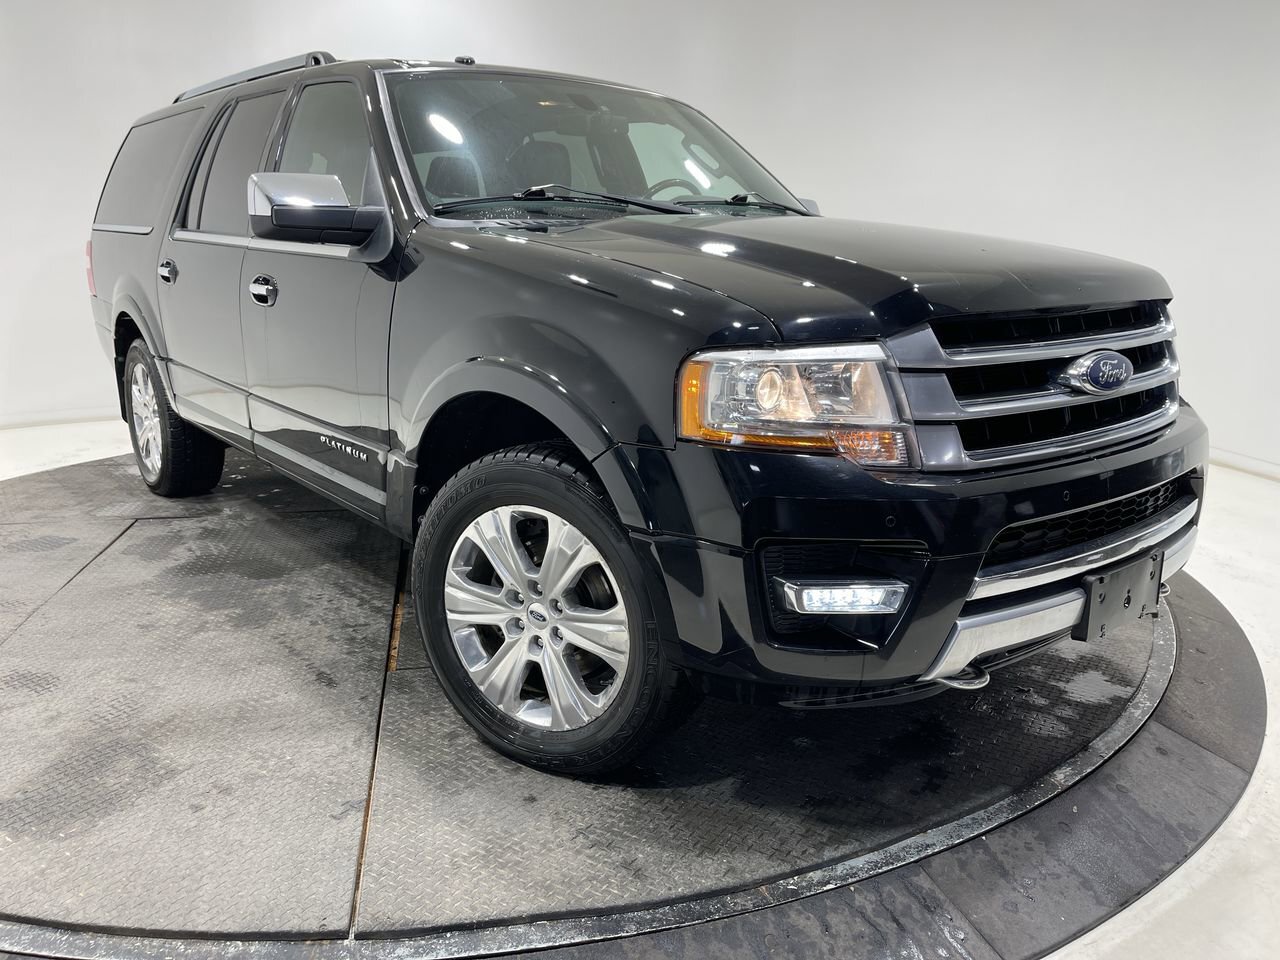 2016 Ford Expedition Max Platinum Max- $0 Down $170 Weekly